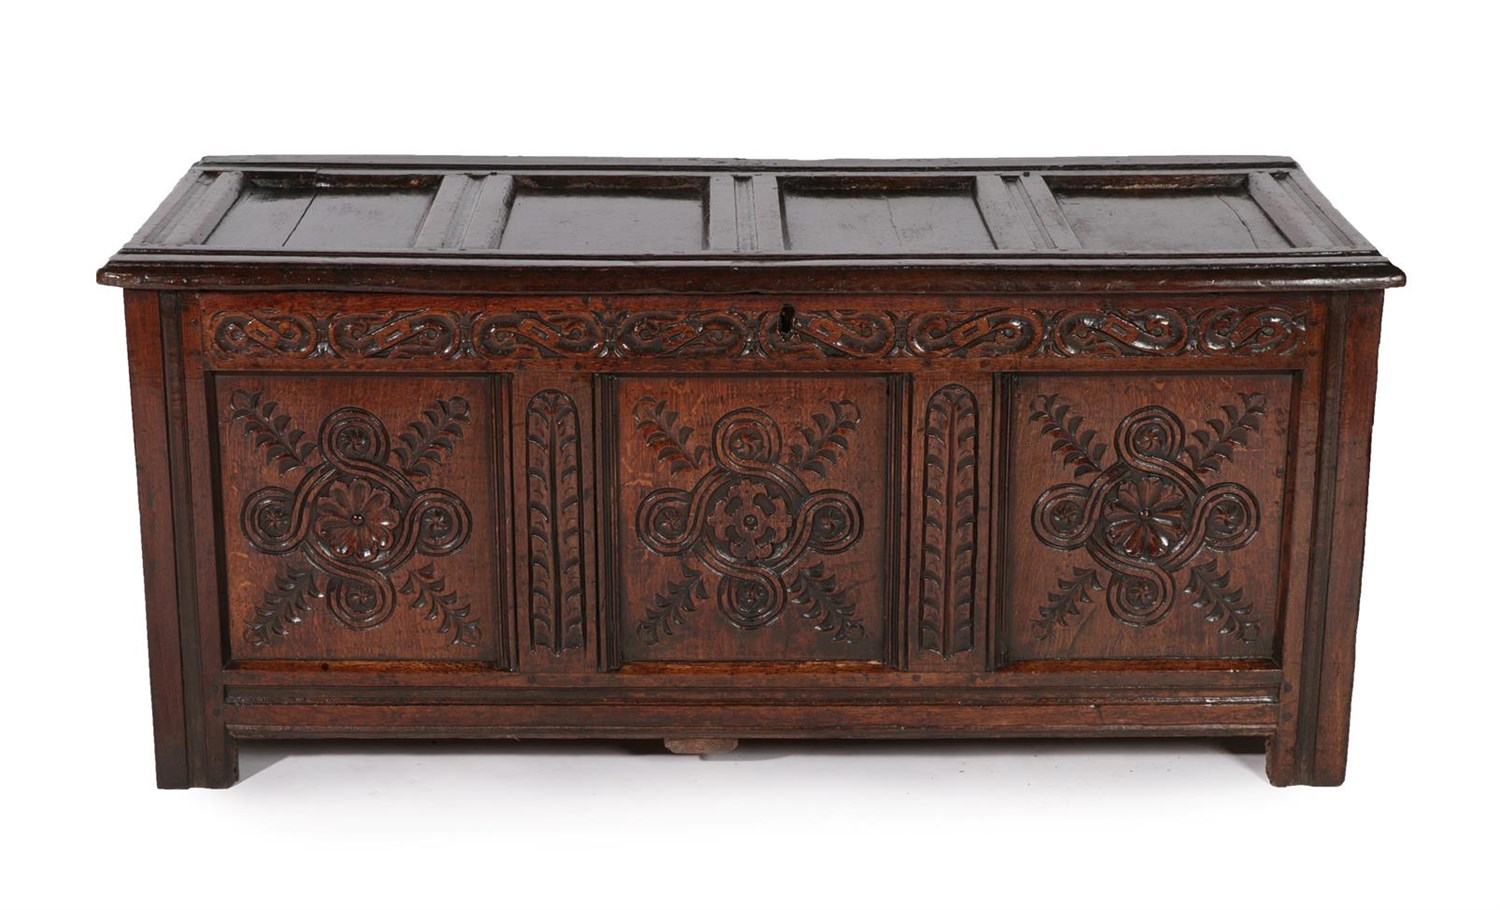 Lot 440 - A Late 17th Century Joined Oak Chest, the hinged lid with four moulded panels above a carved frieze